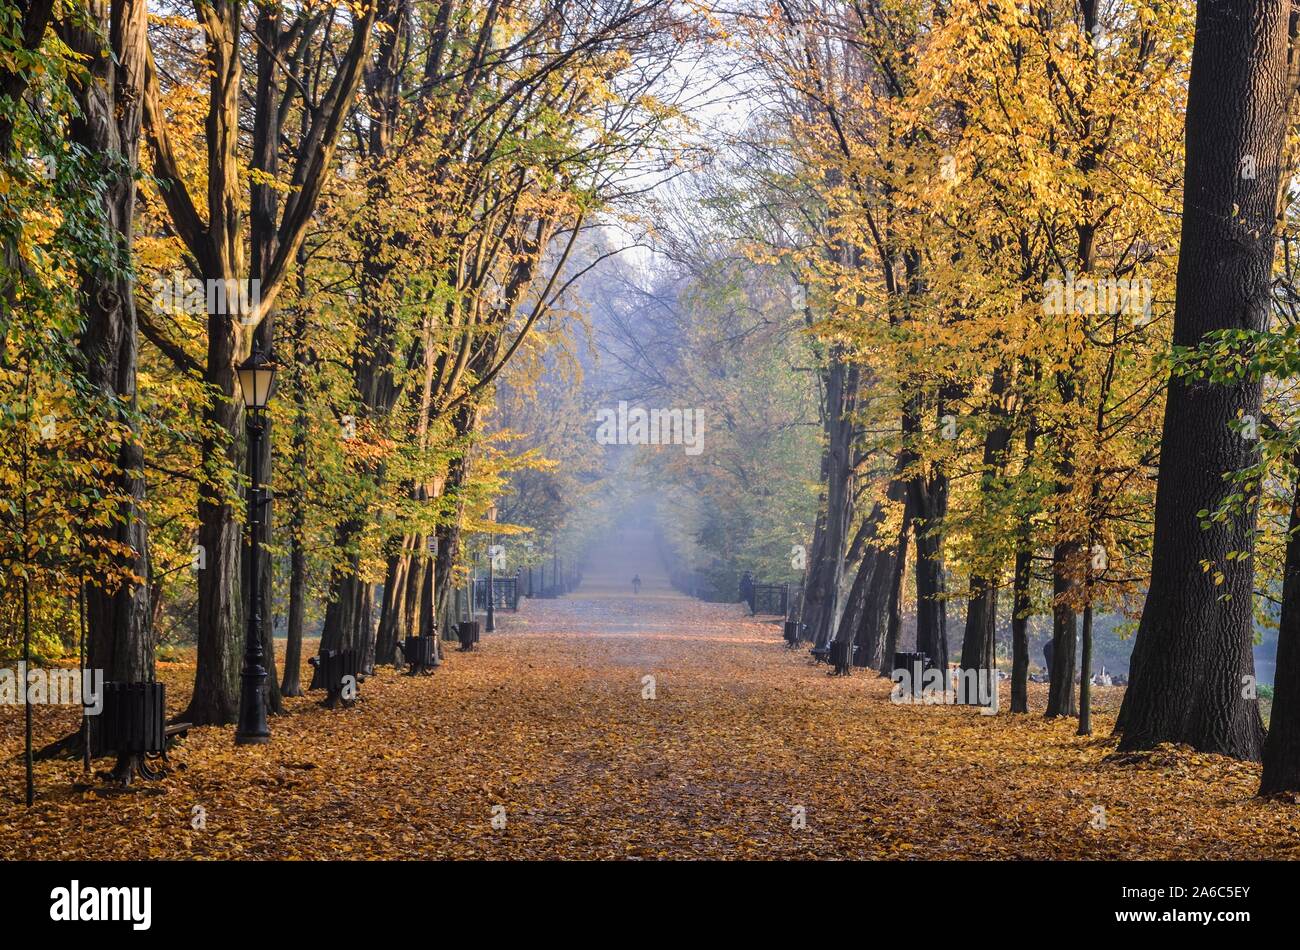 Beautiful autumn landscape. Colorful tree leaves in a city park. Stock Photo